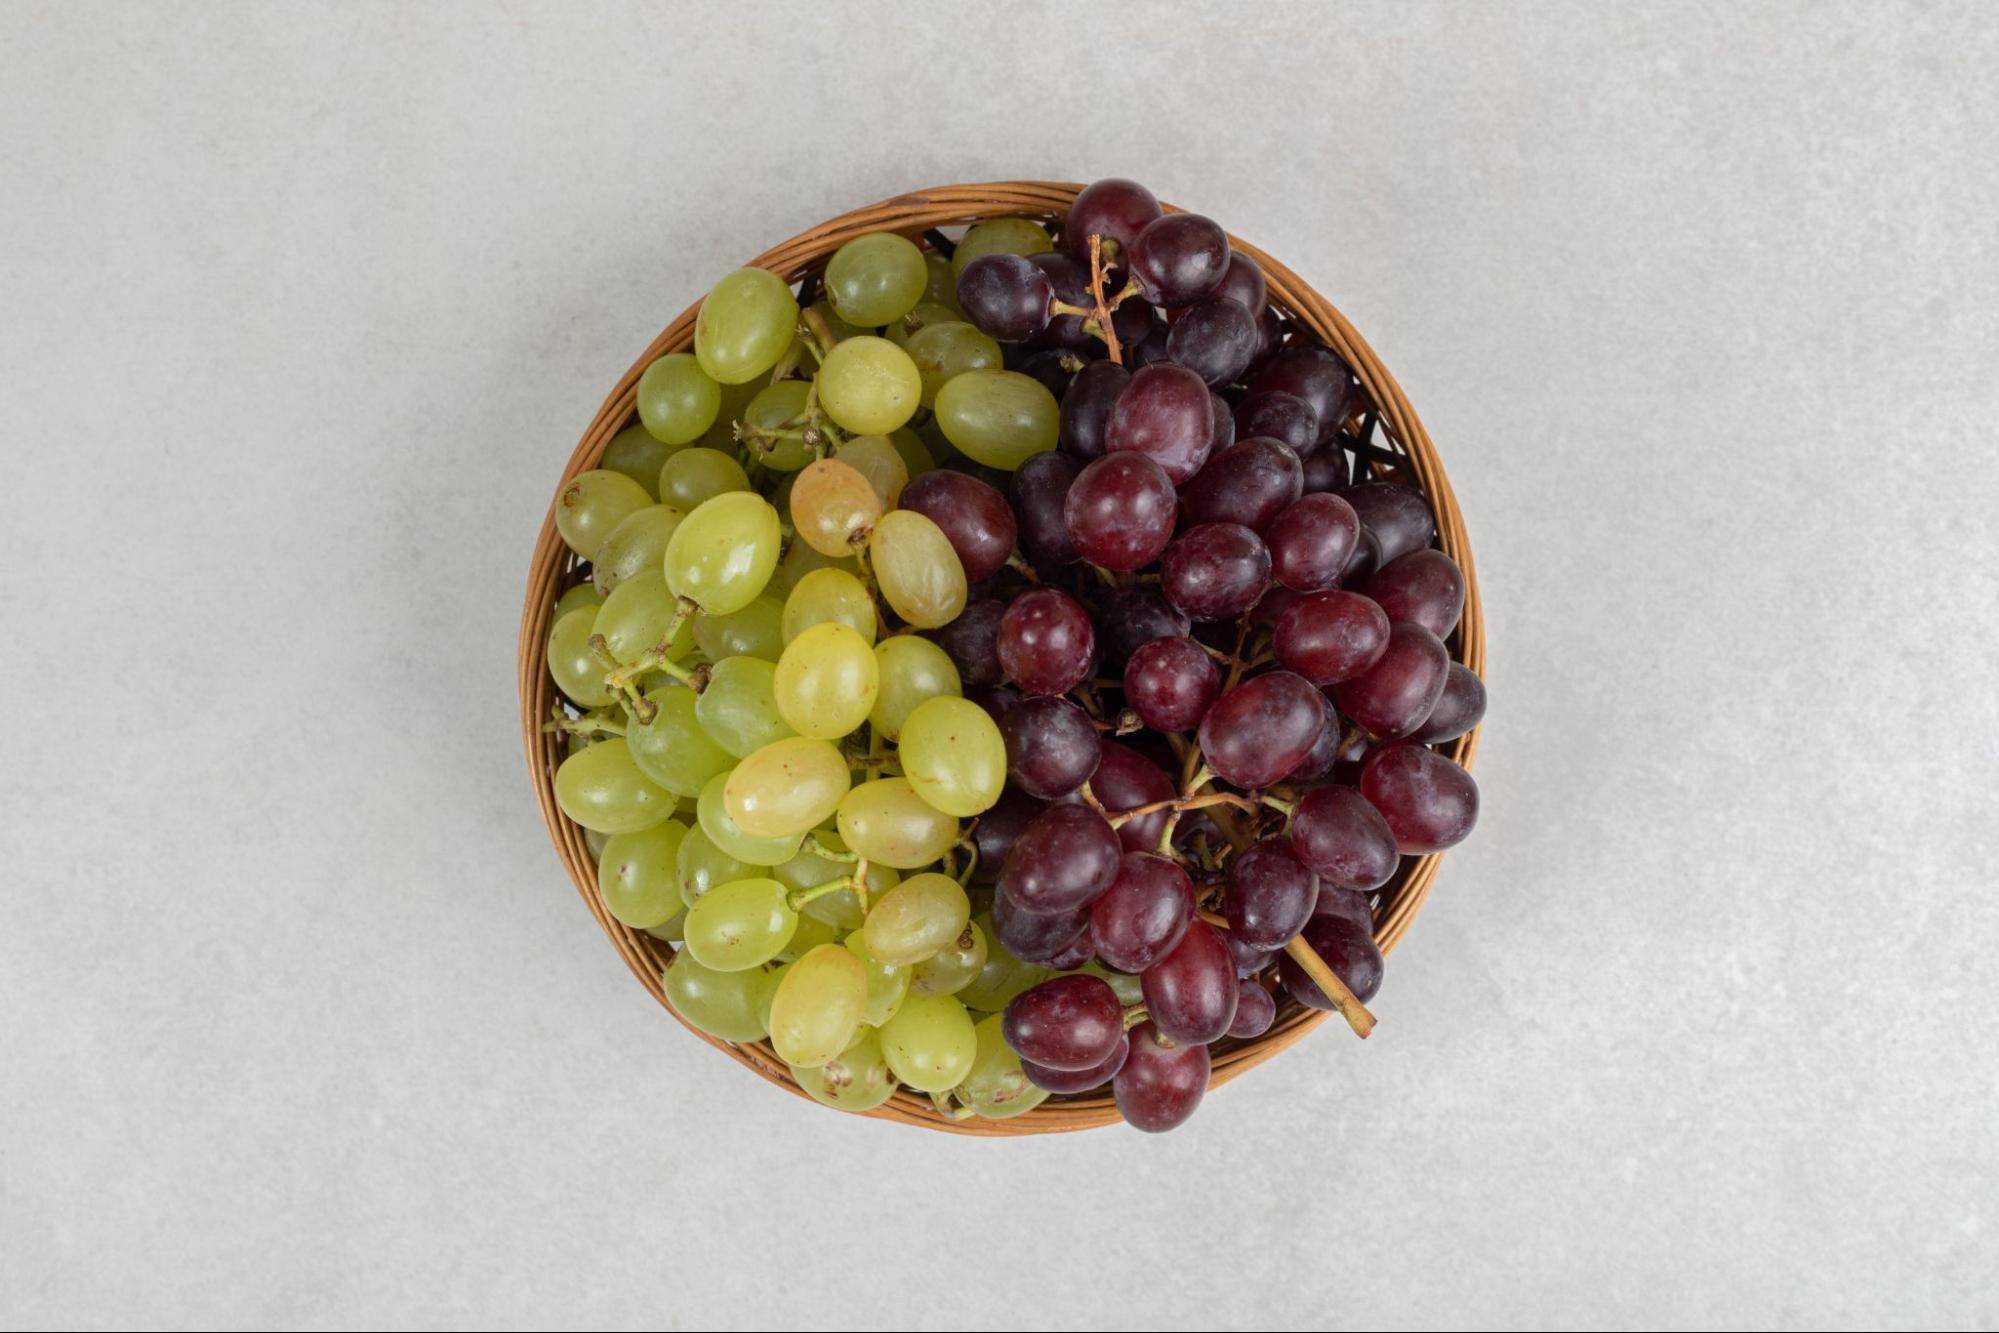 Grapes for Hair Loss Prevention